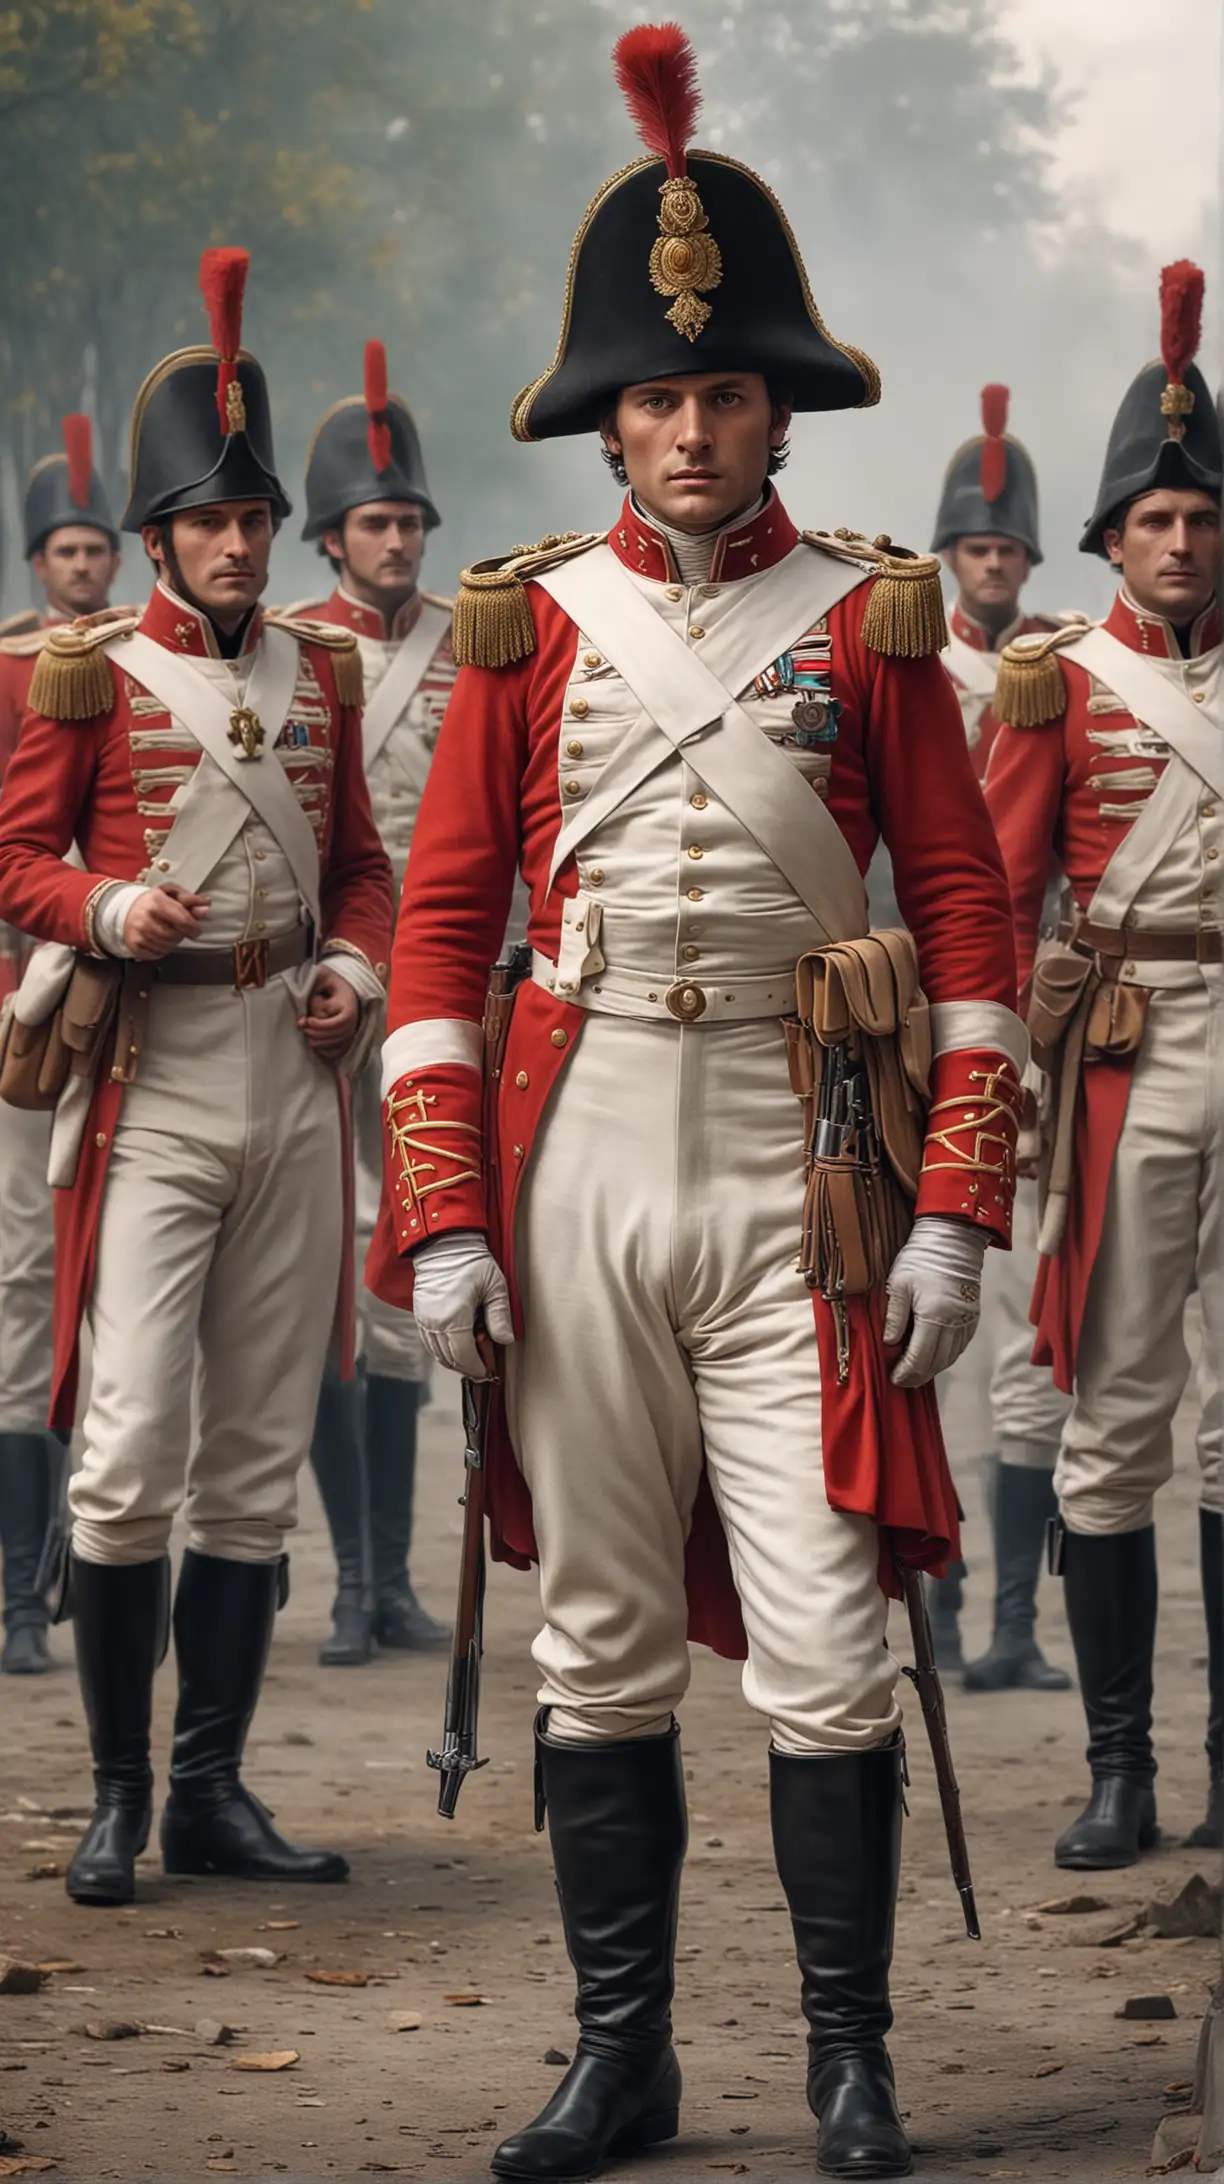 Image of Napoleon with Swiss soldiers in iconic uniforms. Hyper realistic